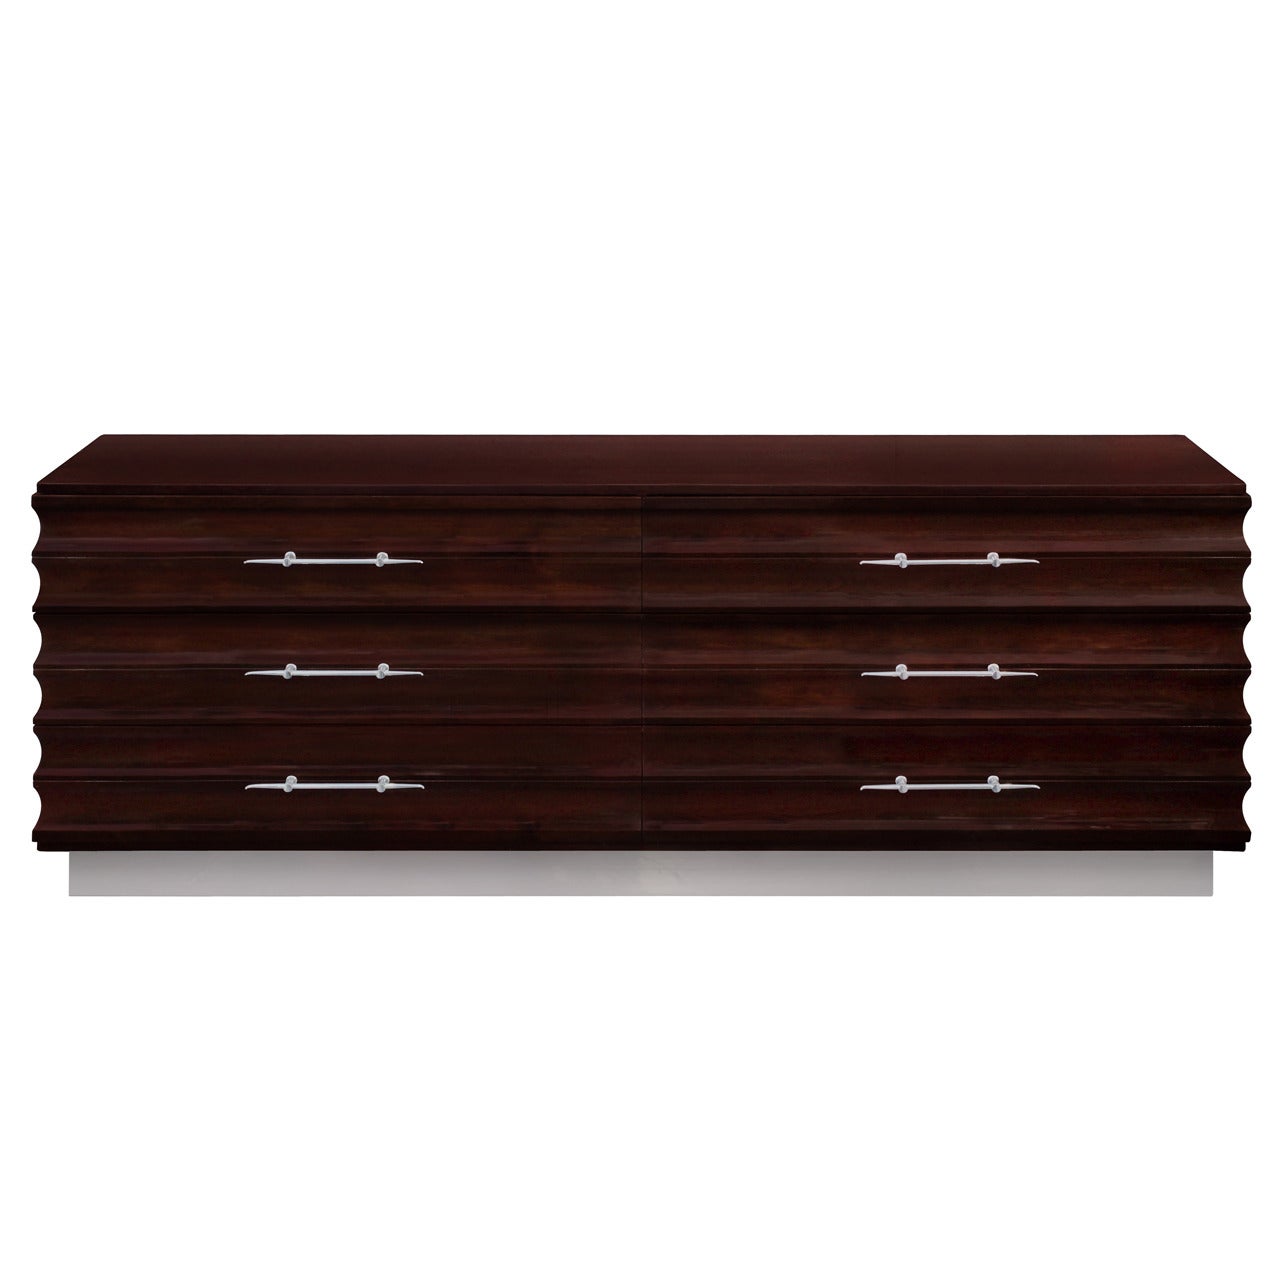 Large and Exceptional Chest of Drawers in Dark Walnut by Tommi Parzinger